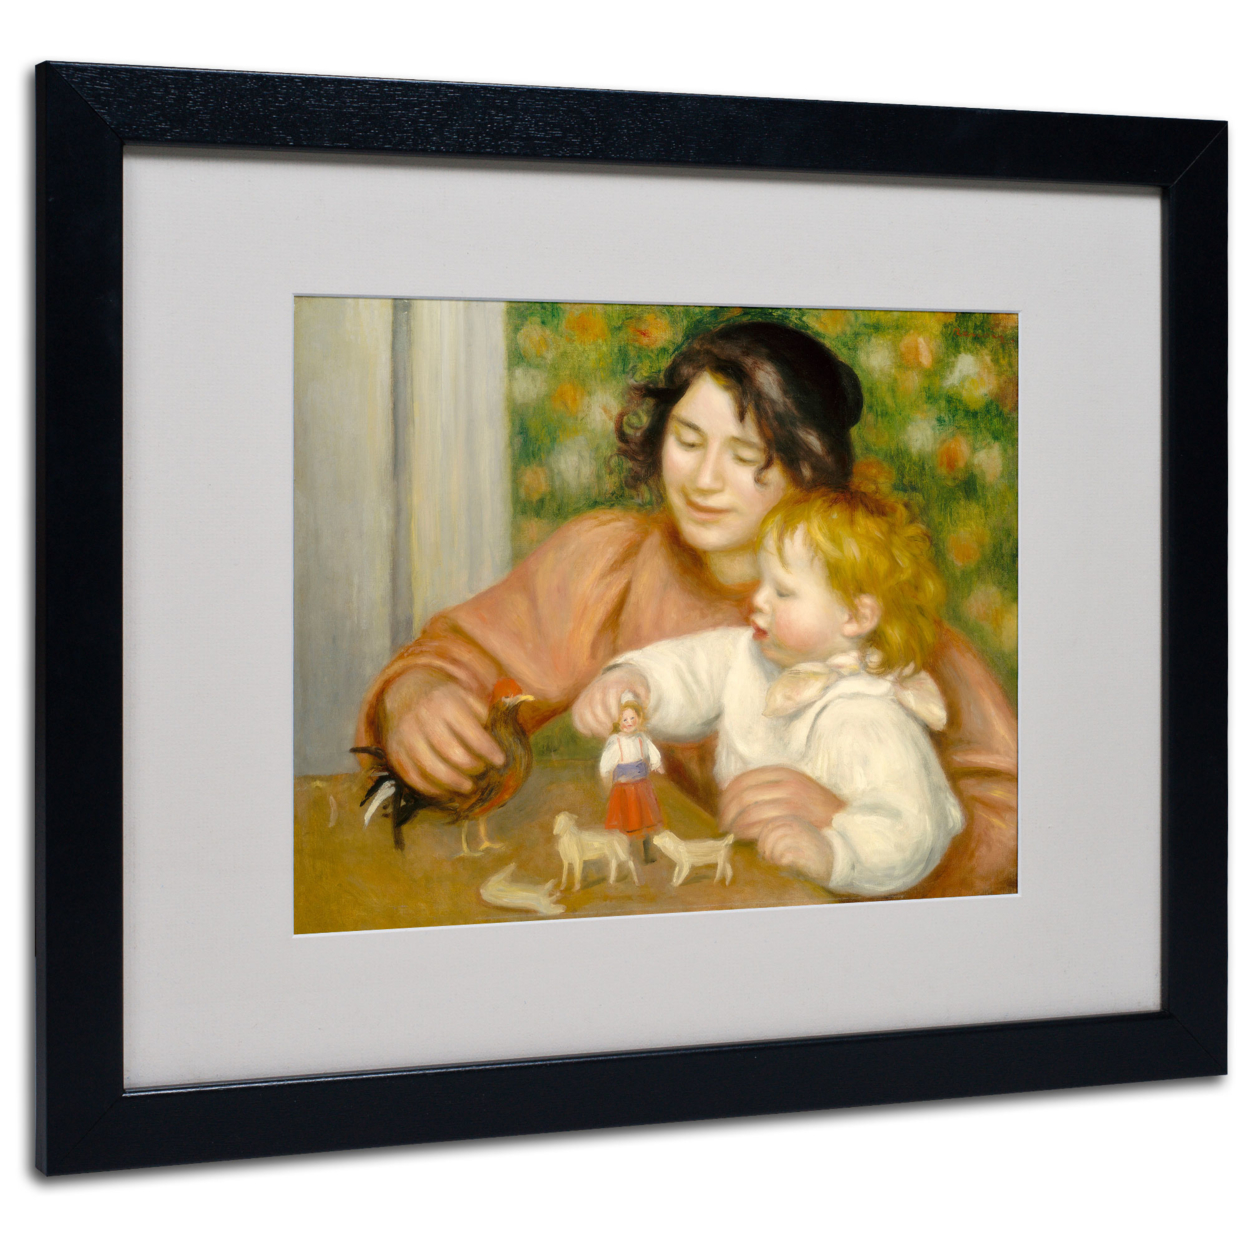 Pierre Renoir 'Child With Toys 1895-96' Black Wooden Framed Art 18 X 22 Inches